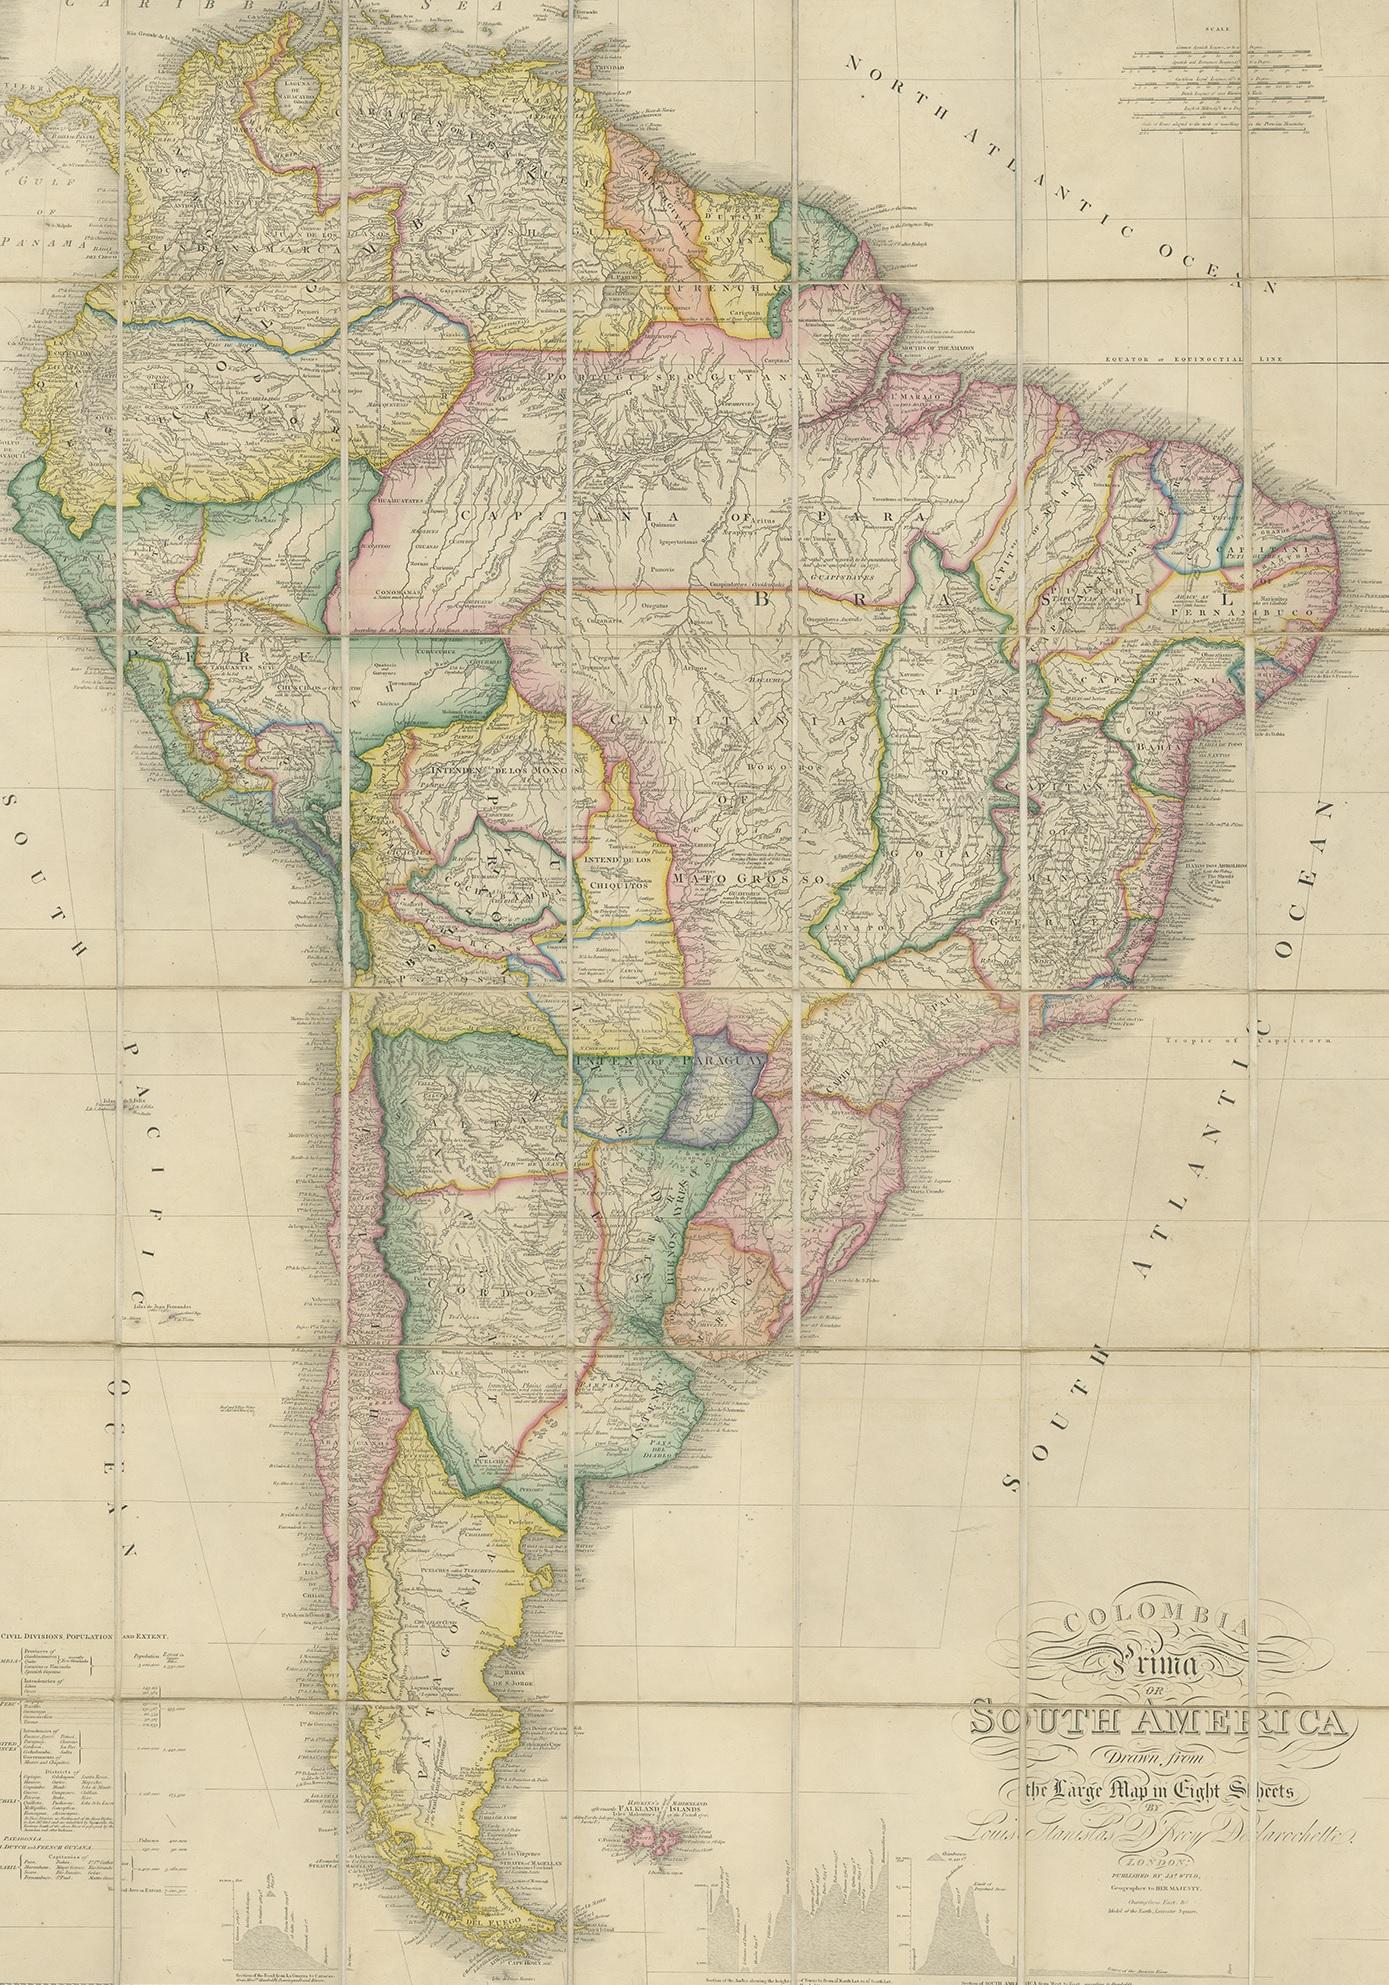 Beautiful folding map of South America titled 'Colombia Prima or South America Drawn from the Large Map in Eight Sheets by Louis Stanislas D ' Arcy Delarochette'. Three insets in the lower portion of the map present data from Humboldt's report in